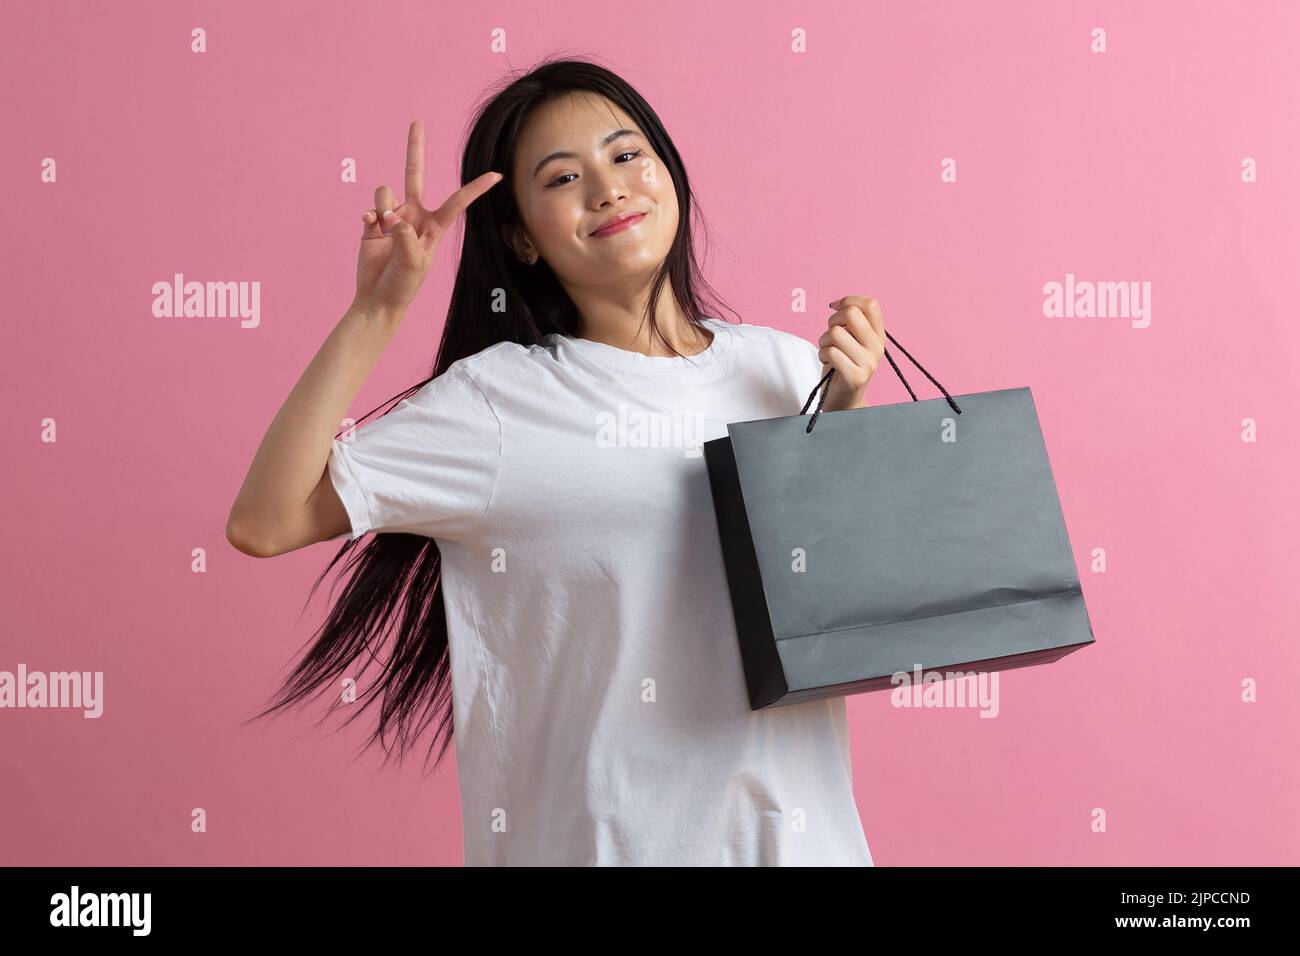 Shopping asian happy woman holding shopping bags on pink background. Stock Photo